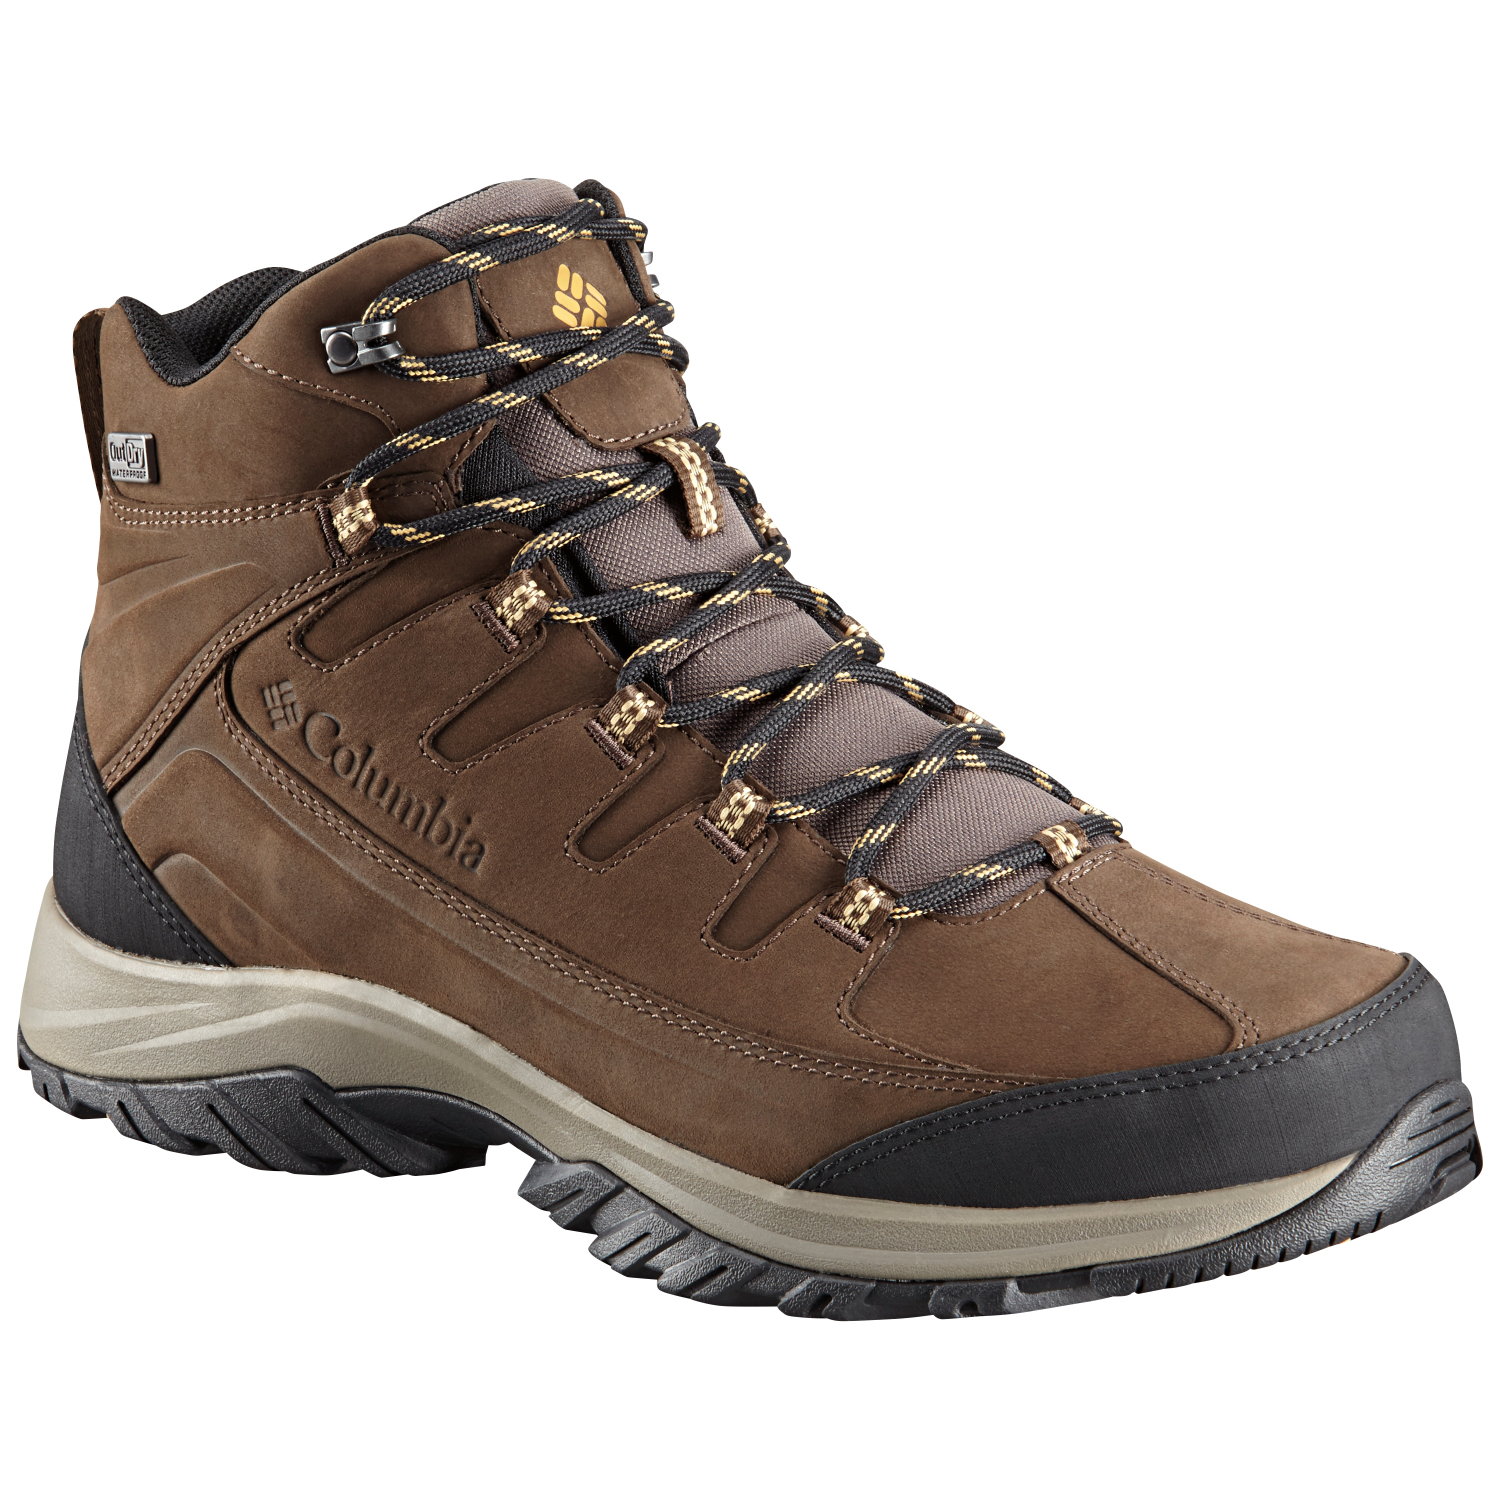 Columbia Mens Trekking Shoes Terrebonne II Outdry at low prices